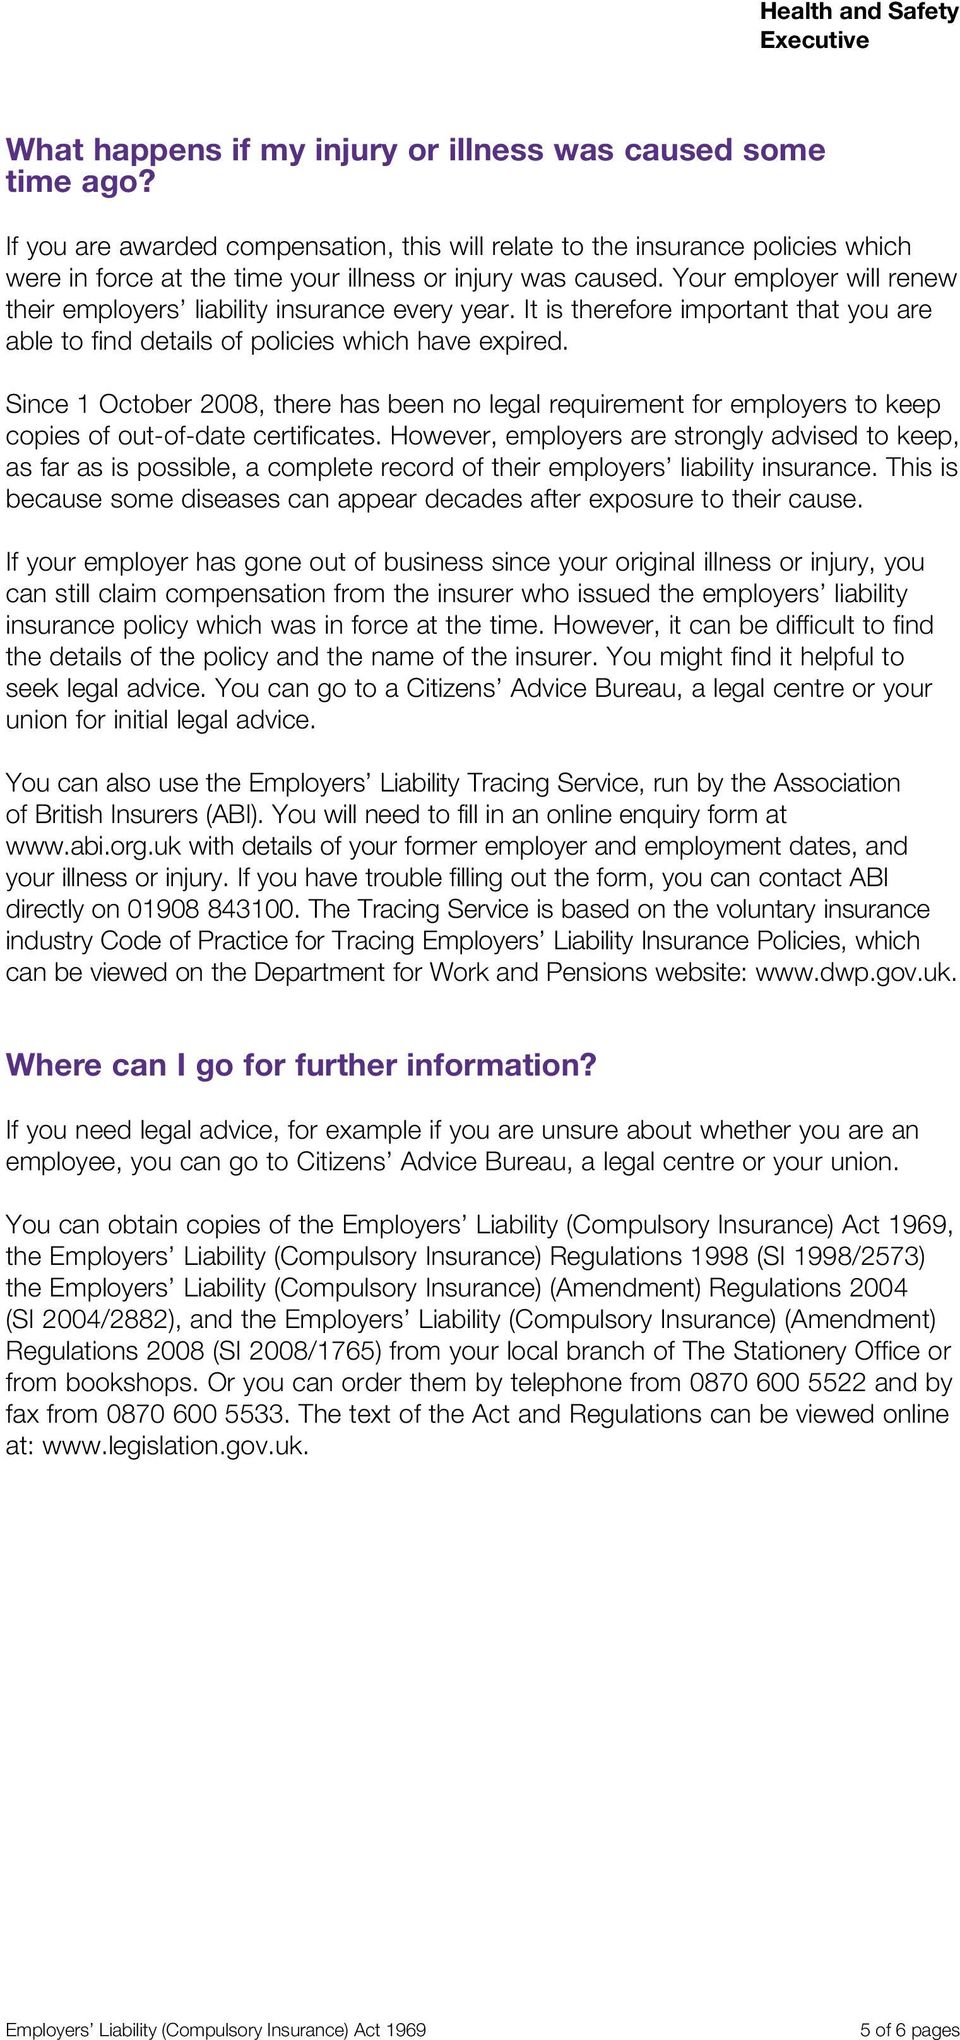 Your employer will renew their employers liability insurance every year. It is therefore important that you are able to find details of policies which have expired.